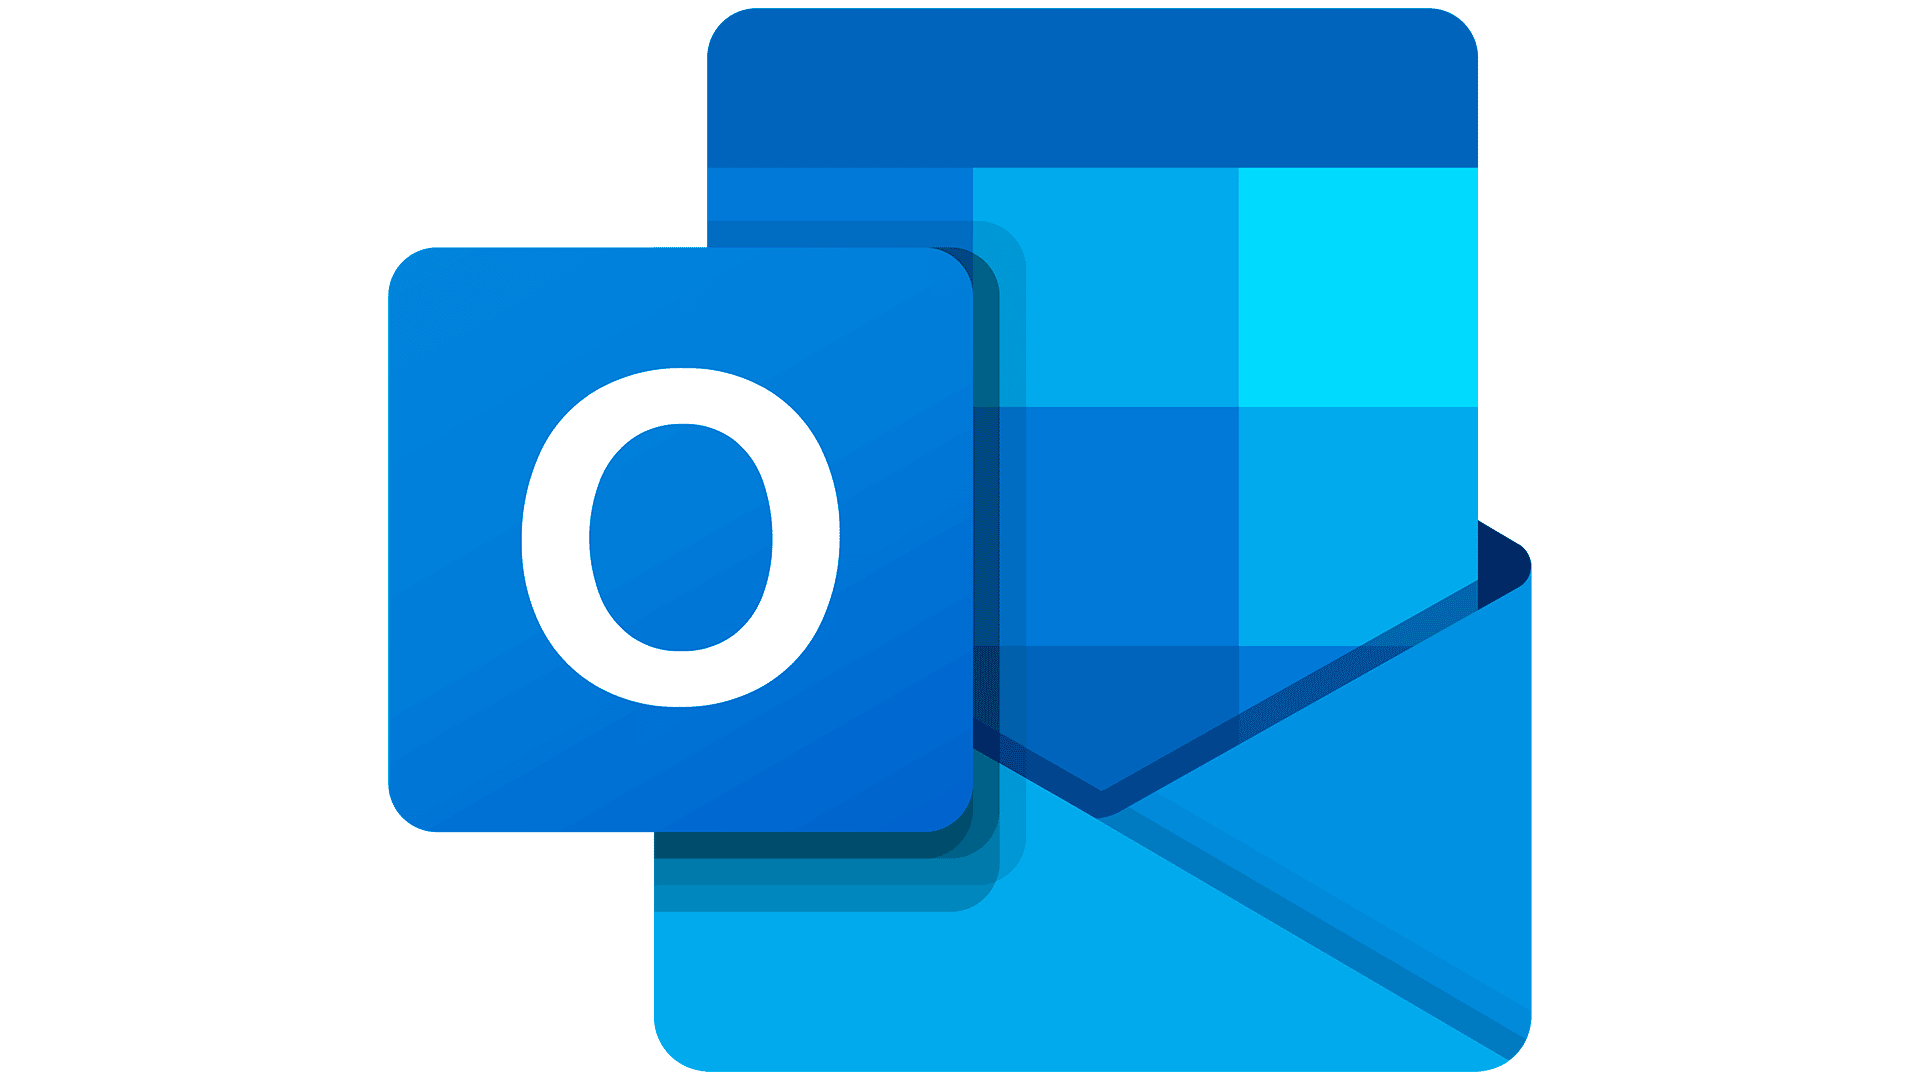 Our Task Management with Outlook trainings